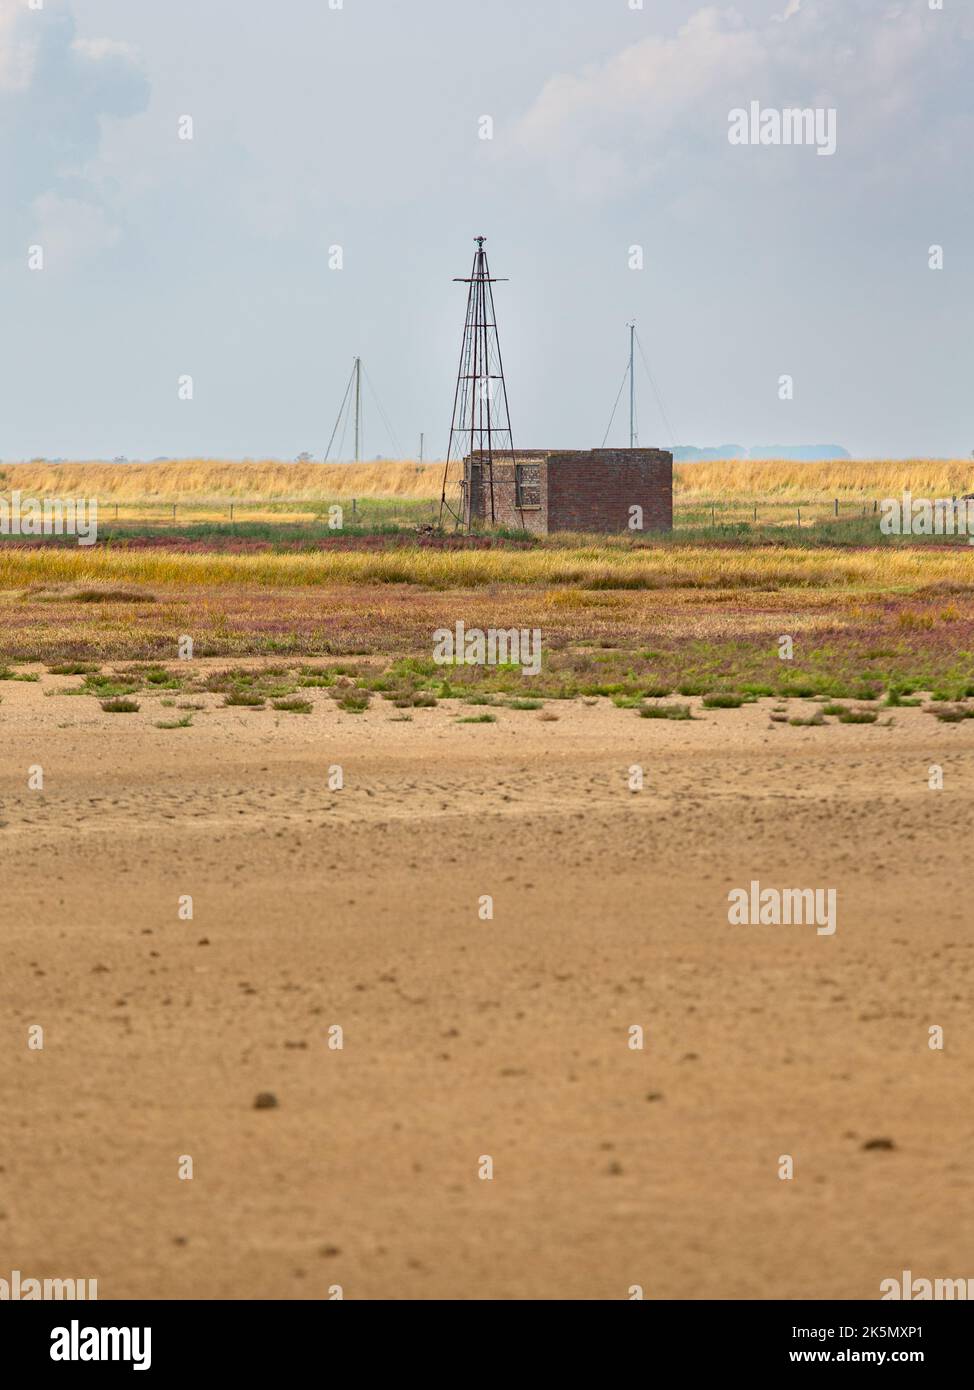 Remnants of hut and mast in a grass and salt marsh landscape, airfield area, Orford Ness, Suffolk, England Stock Photo